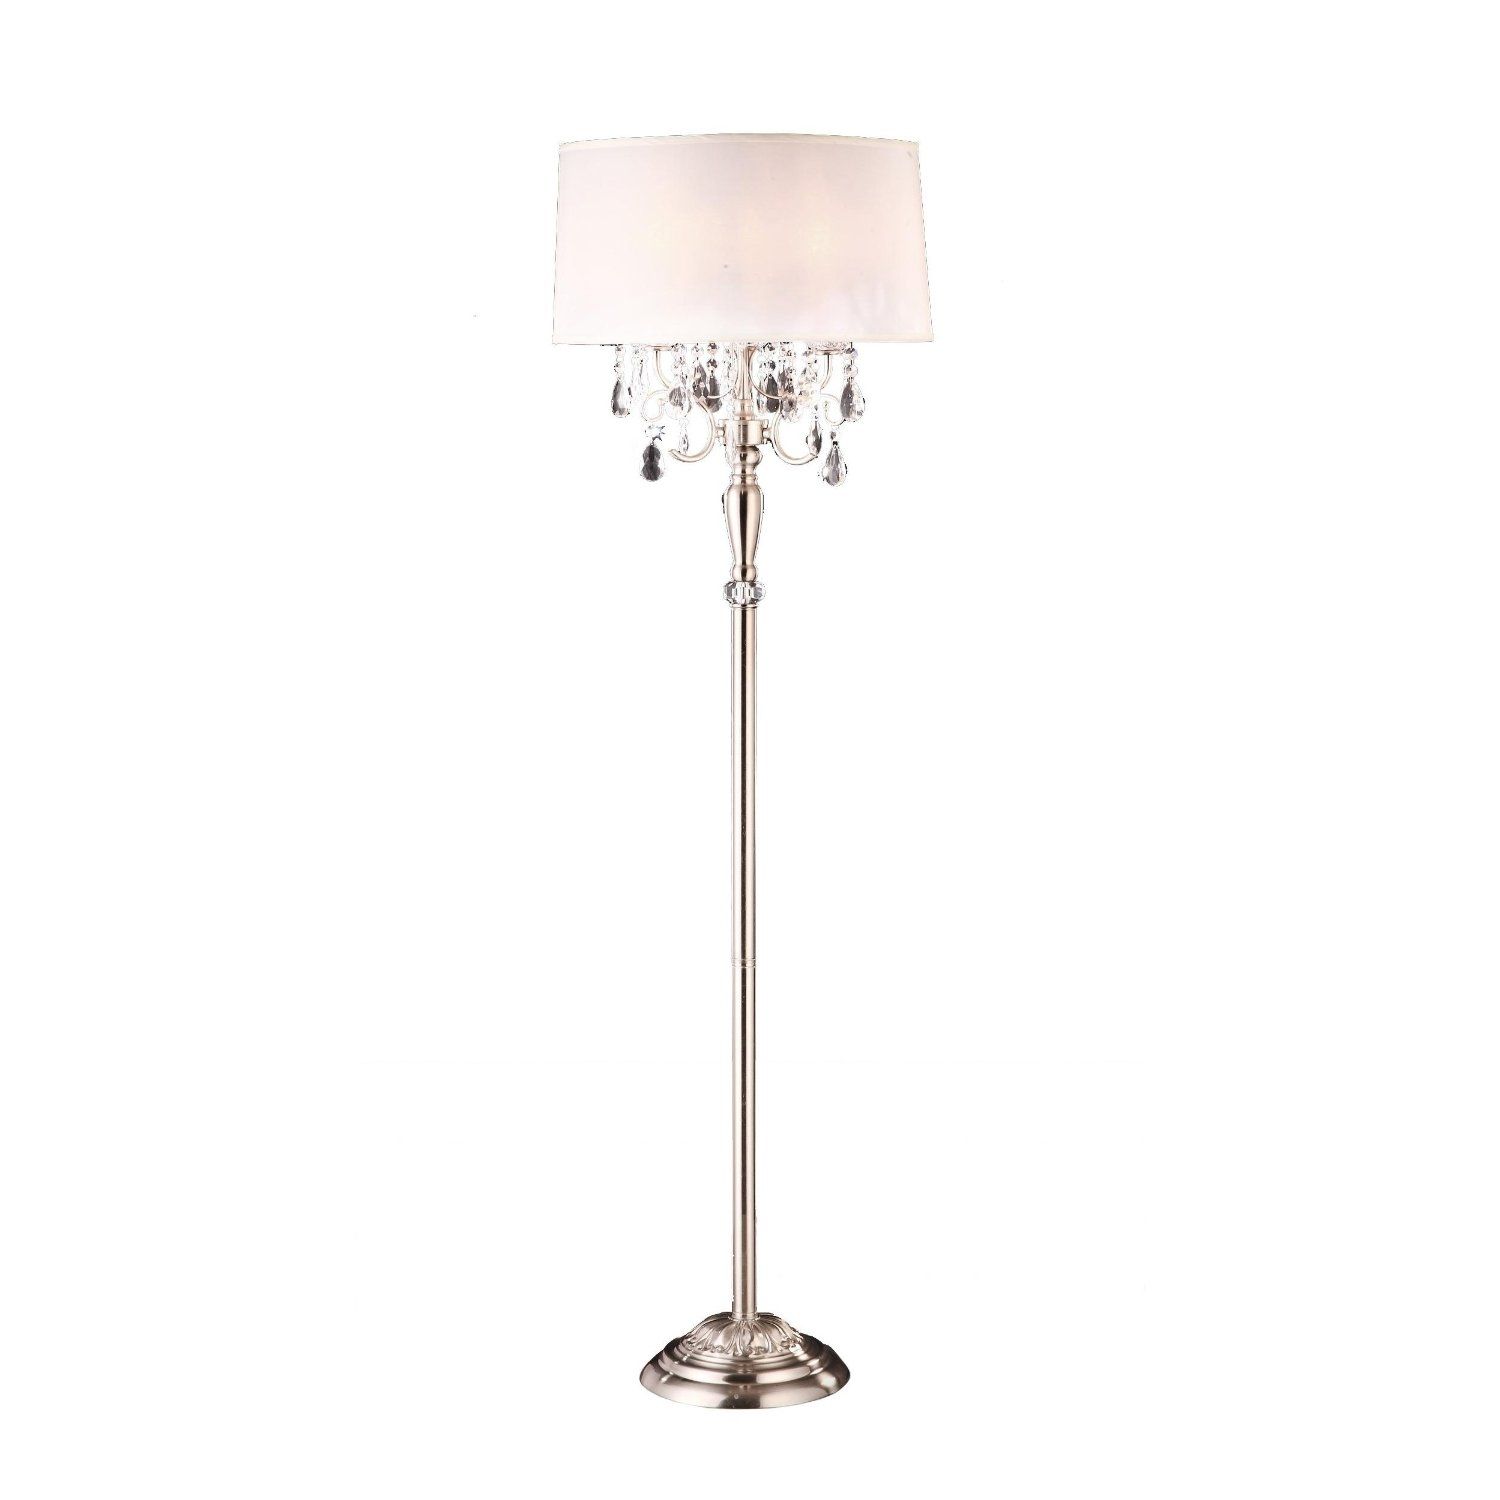 Affordable Stylish Floor Lamps Floor Decoration Throughout Tall Standing Chandelier Lamps (View 12 of 25)